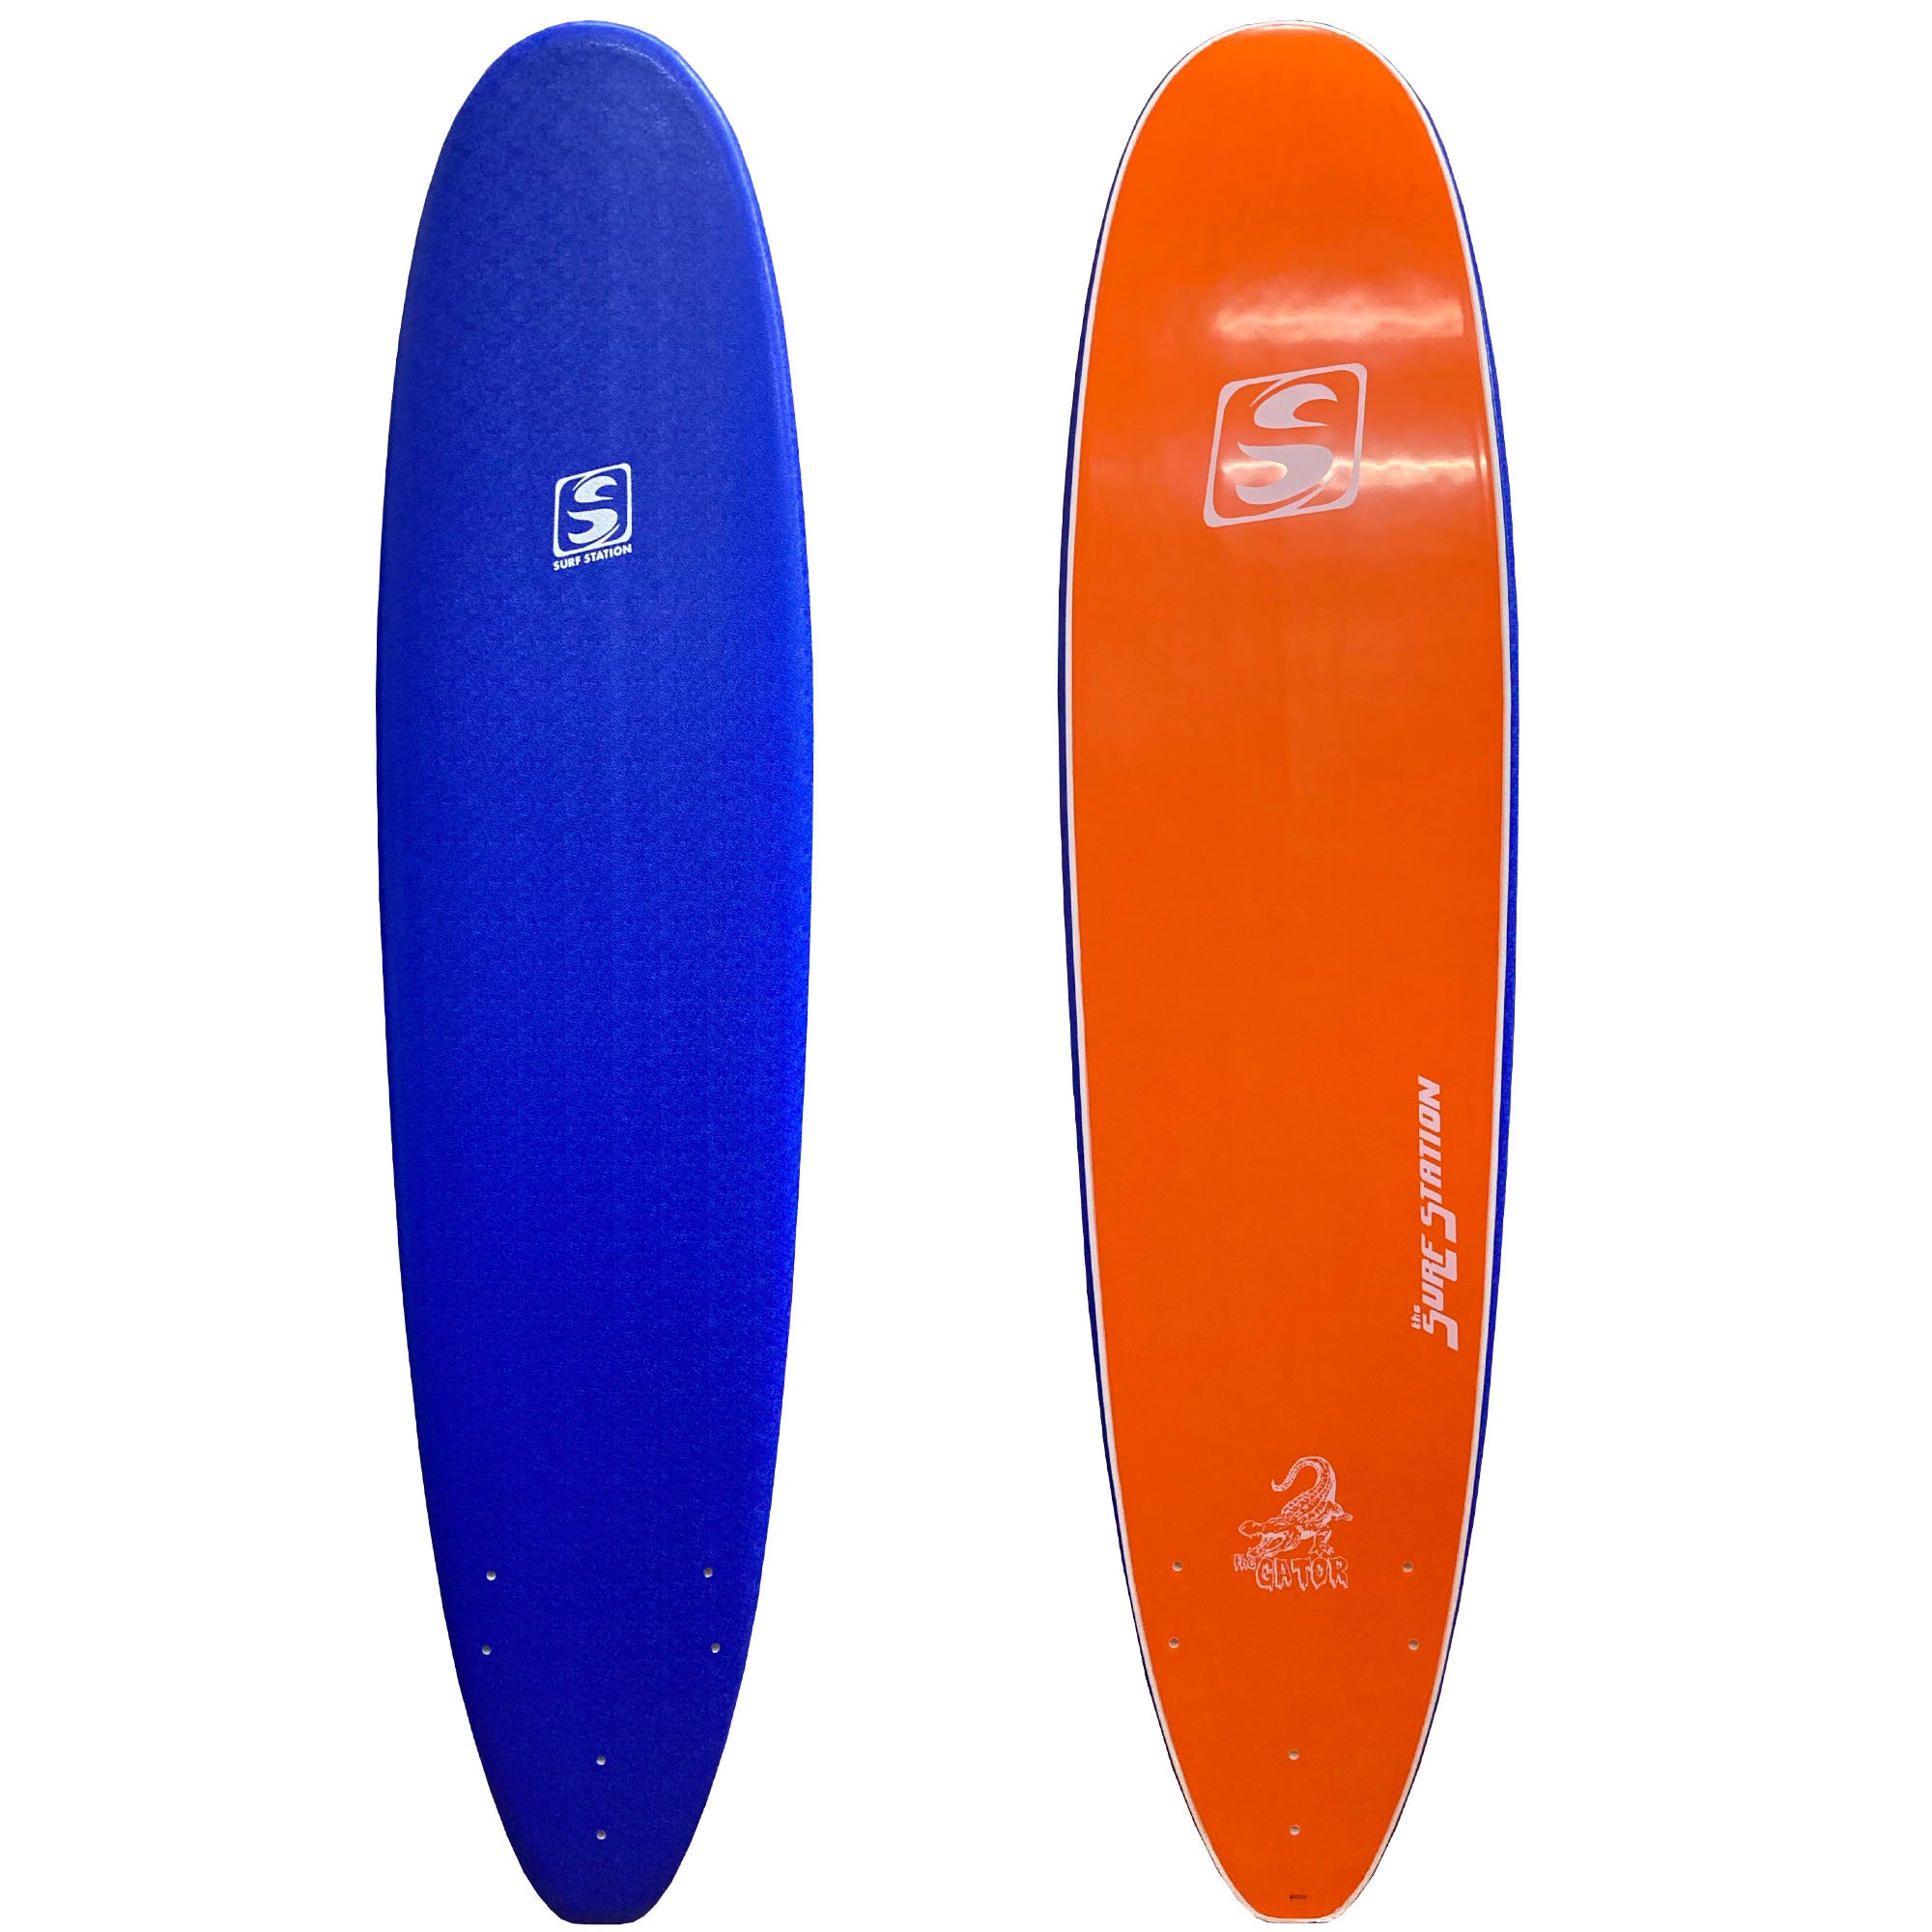 Surf Station Classic 8'0 Soft Surfboard